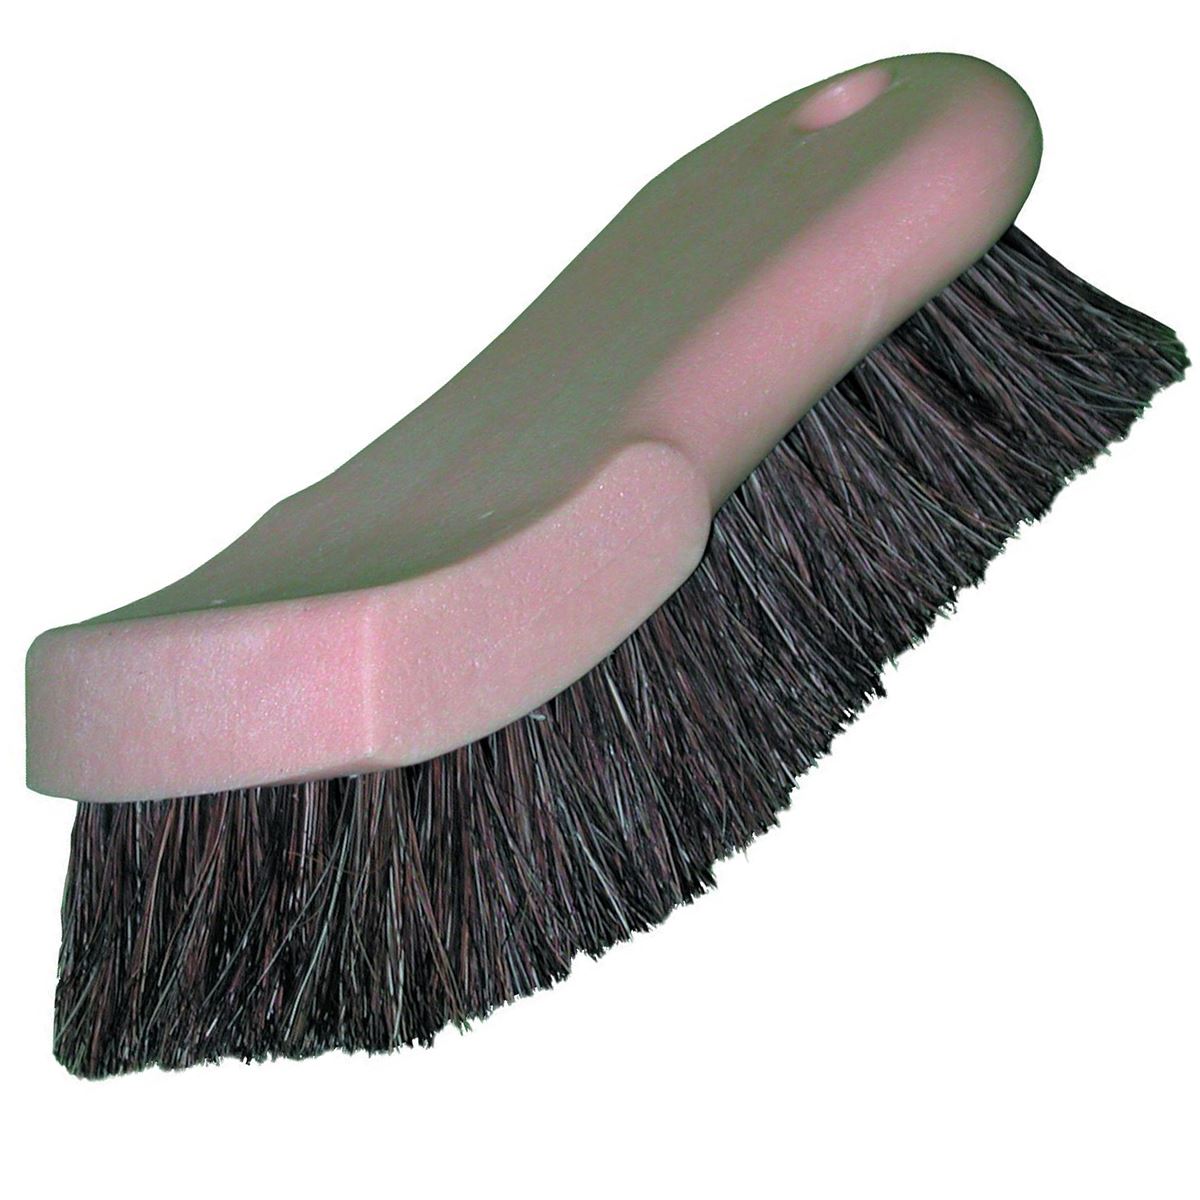 MULTI-PURPOSE HORSE HAIR SCRUB BRUSH. Professional Detailing Products,  Because Your Car is a Reflection of You